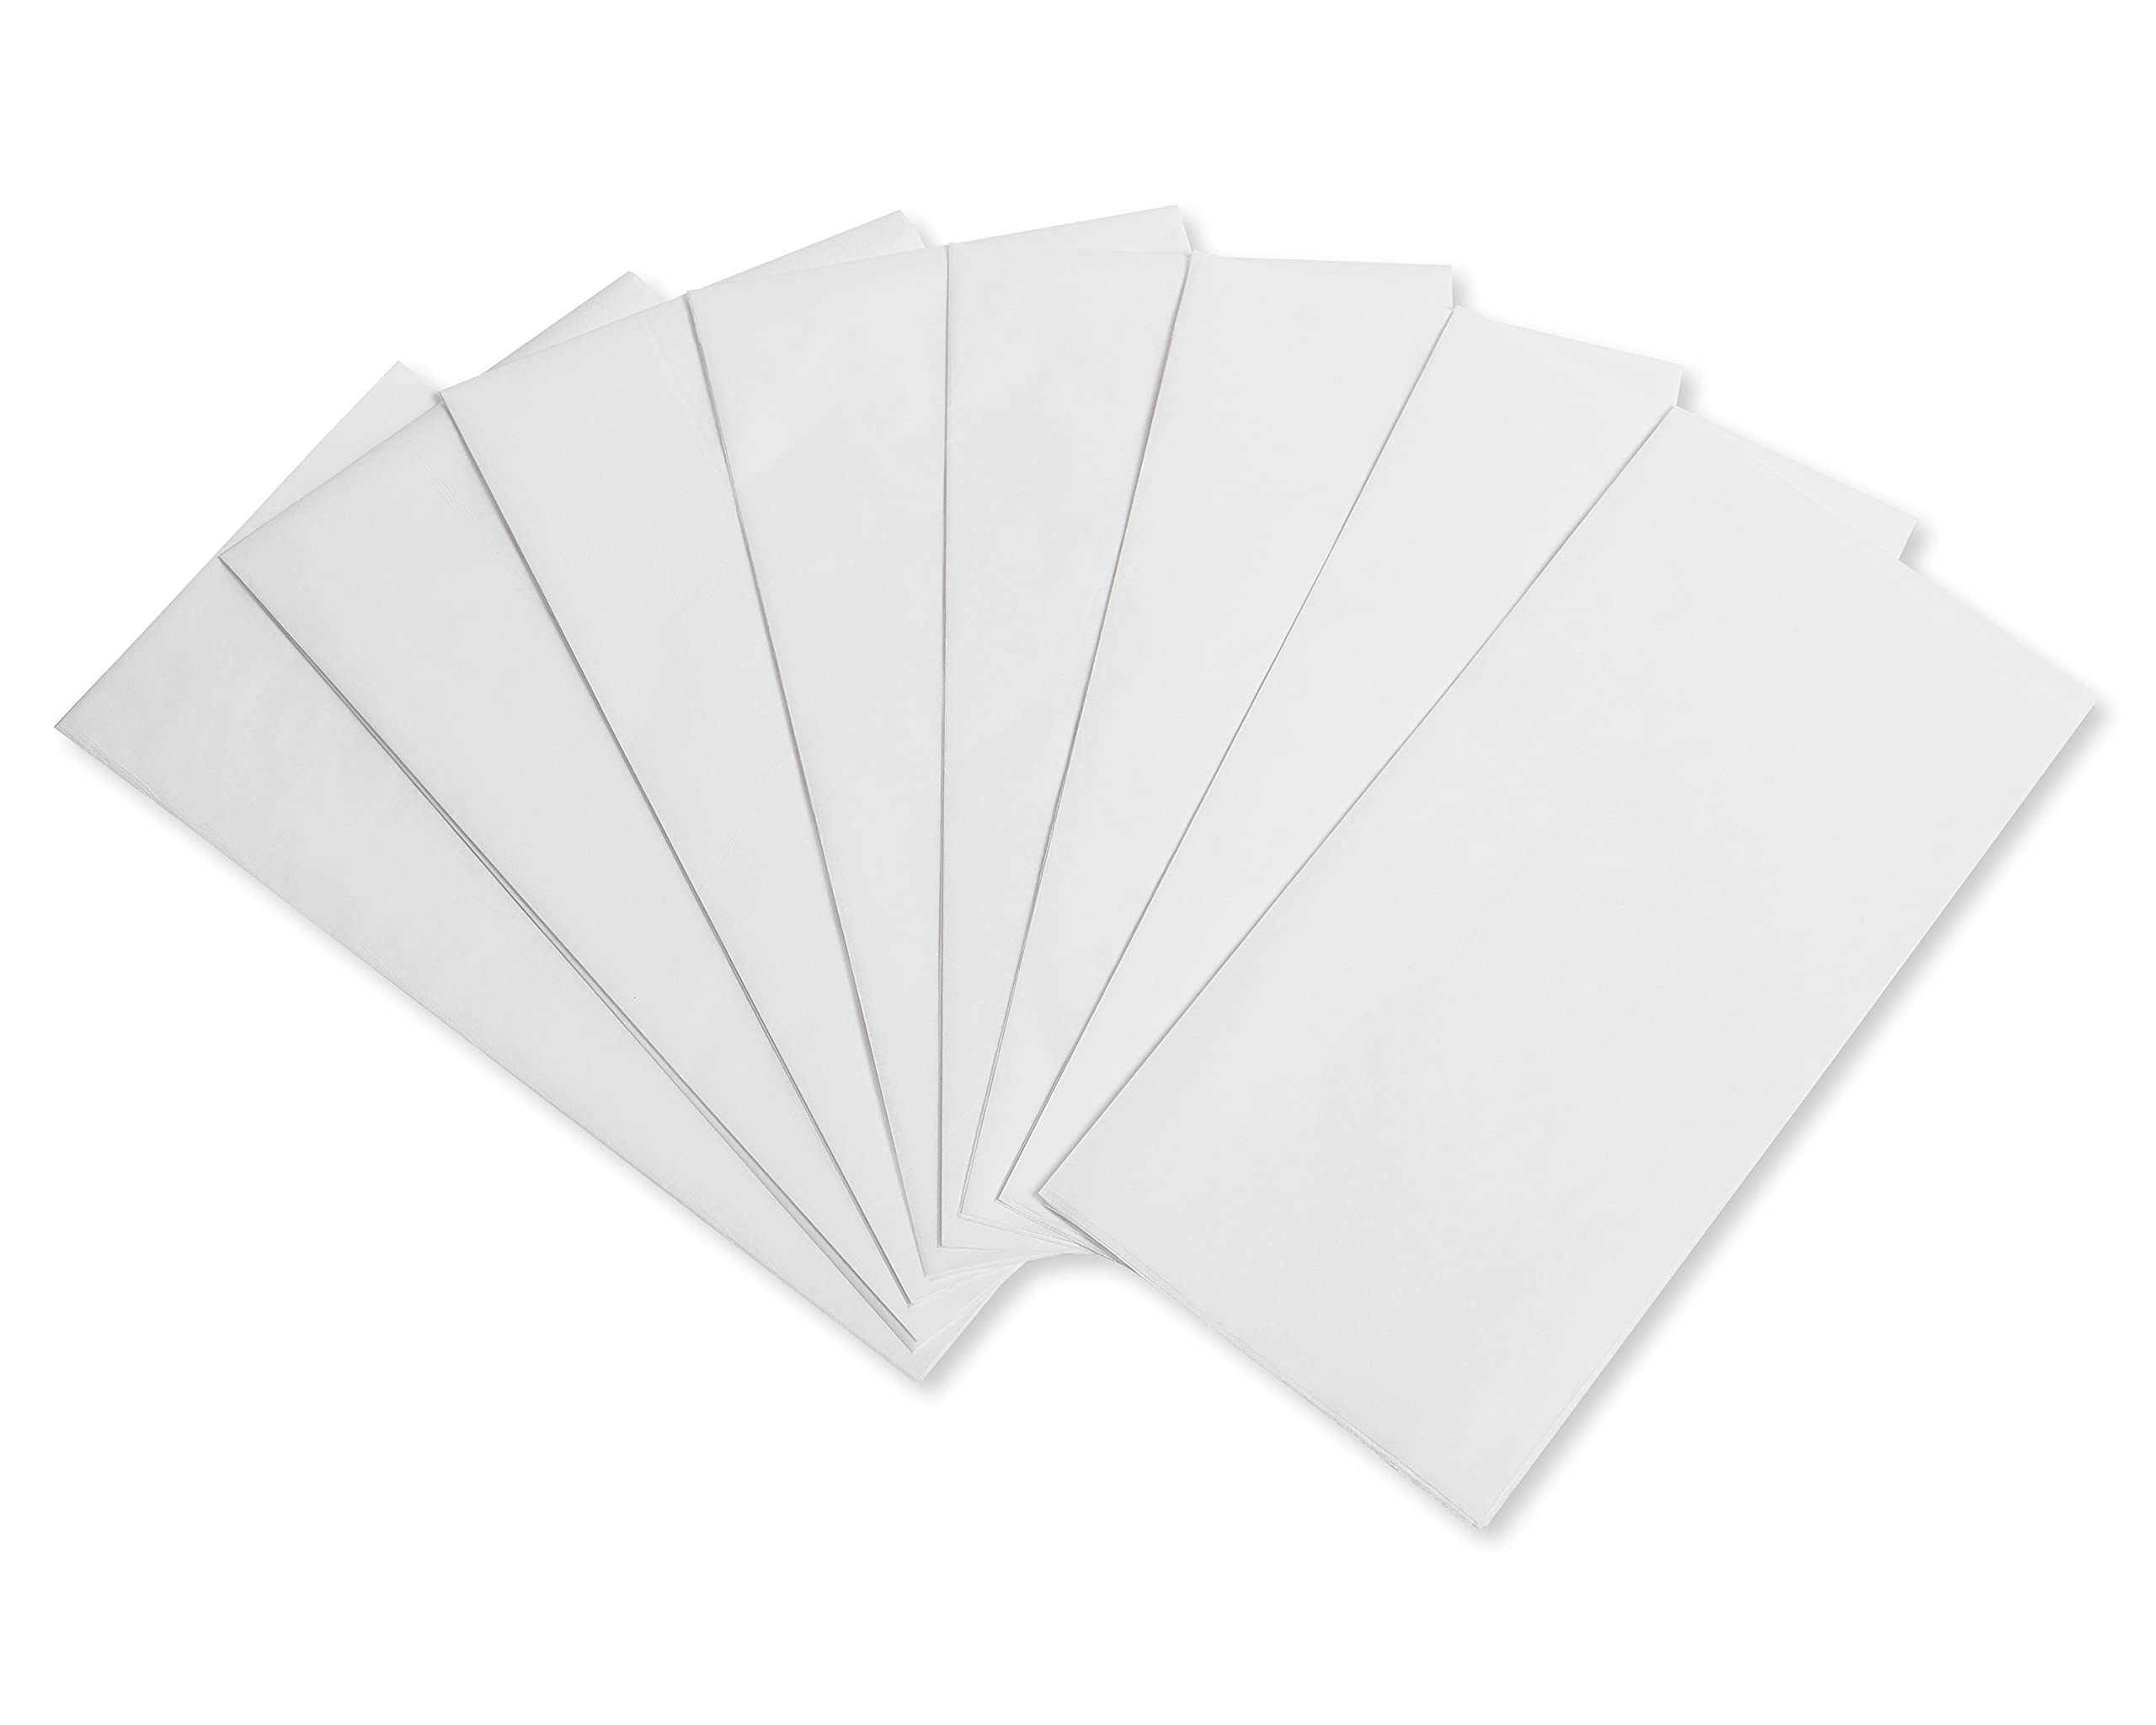 Papyrus 8 Sheet White Tissue Paper for Gifts, Decorations, Crafts, DIY and More